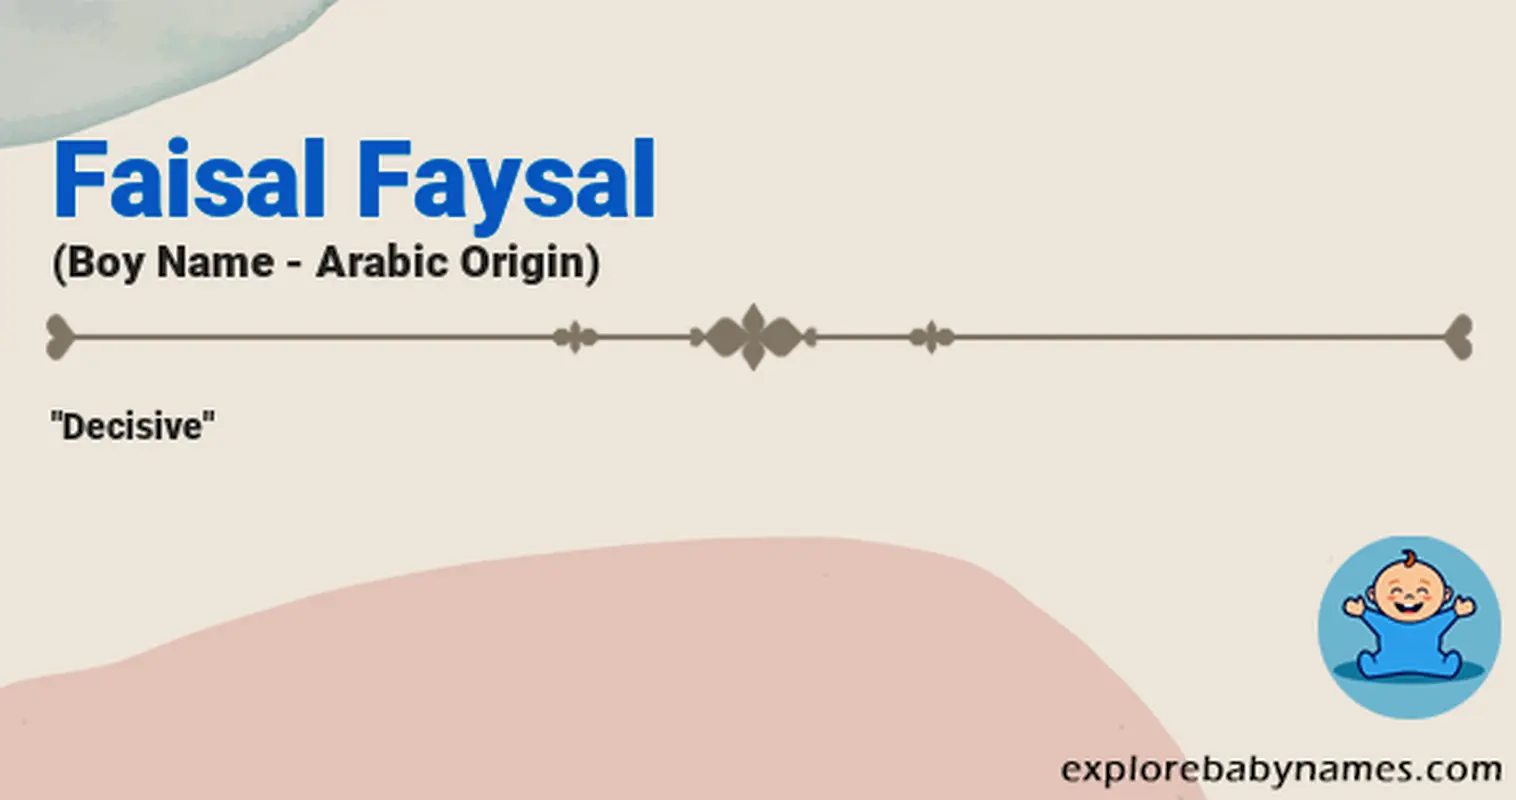 Meaning of Faisal Faysal